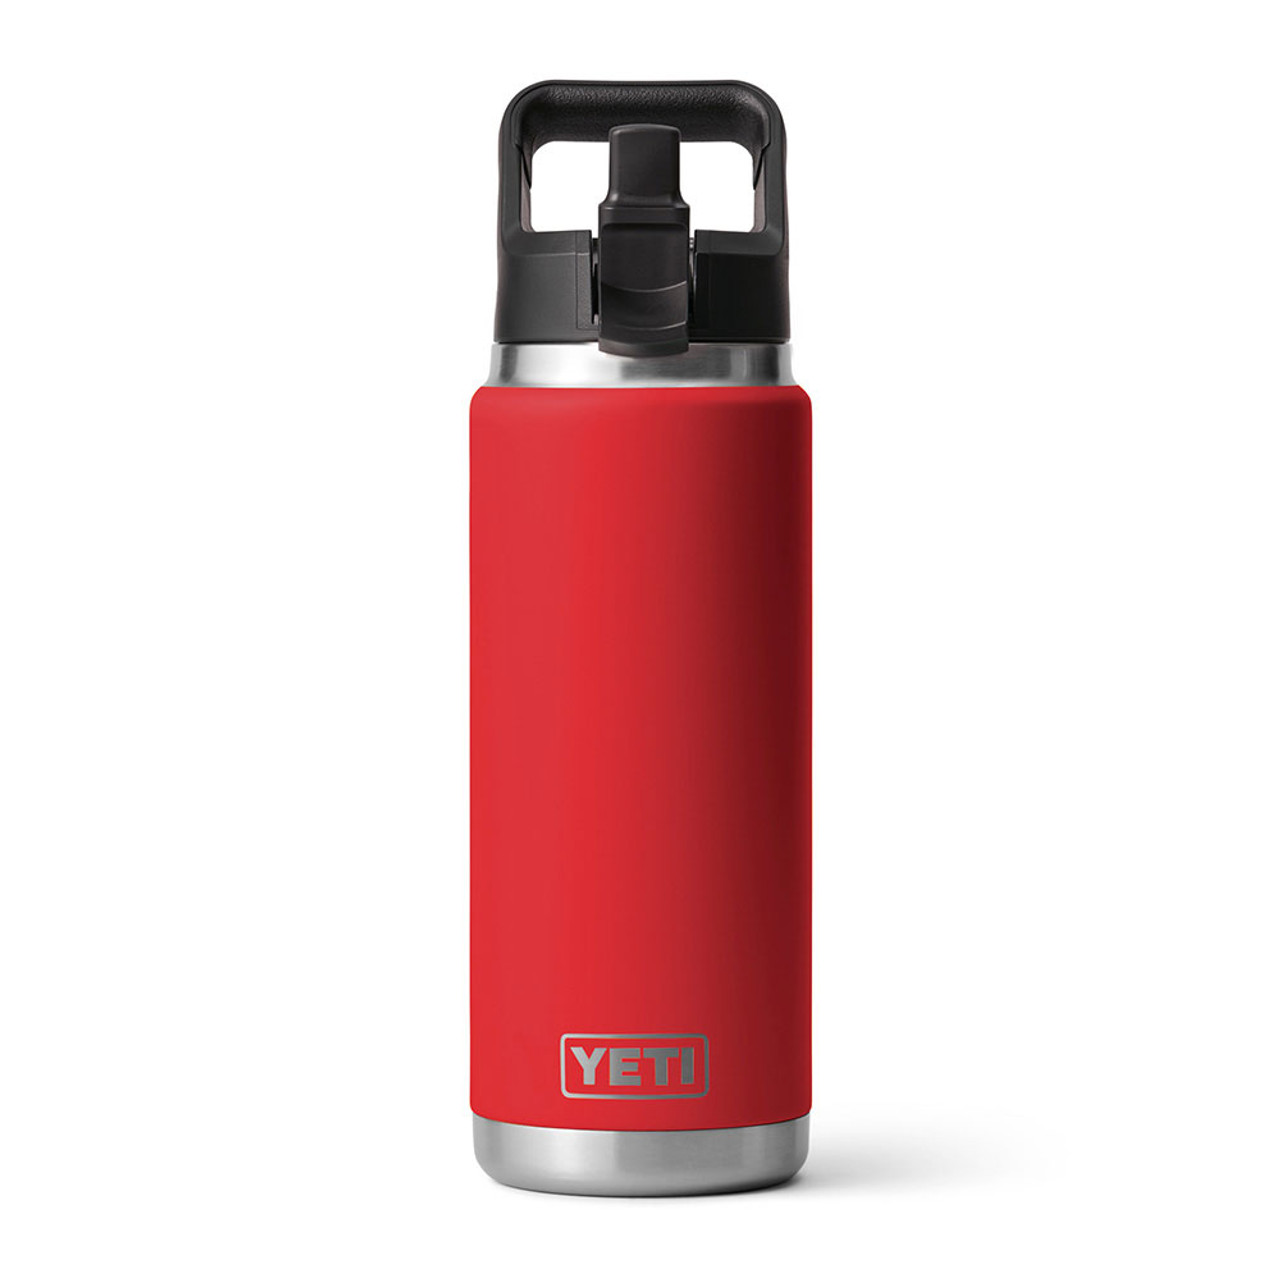 https://cdn11.bigcommerce.com/s-zut1msomd6/images/stencil/1280x1280/products/36596/232491/yeti-rambler-26-oz.-straw-bottle-21071501940-rescured-rescue-red-front-up__62528.1682113268.jpg?c=1